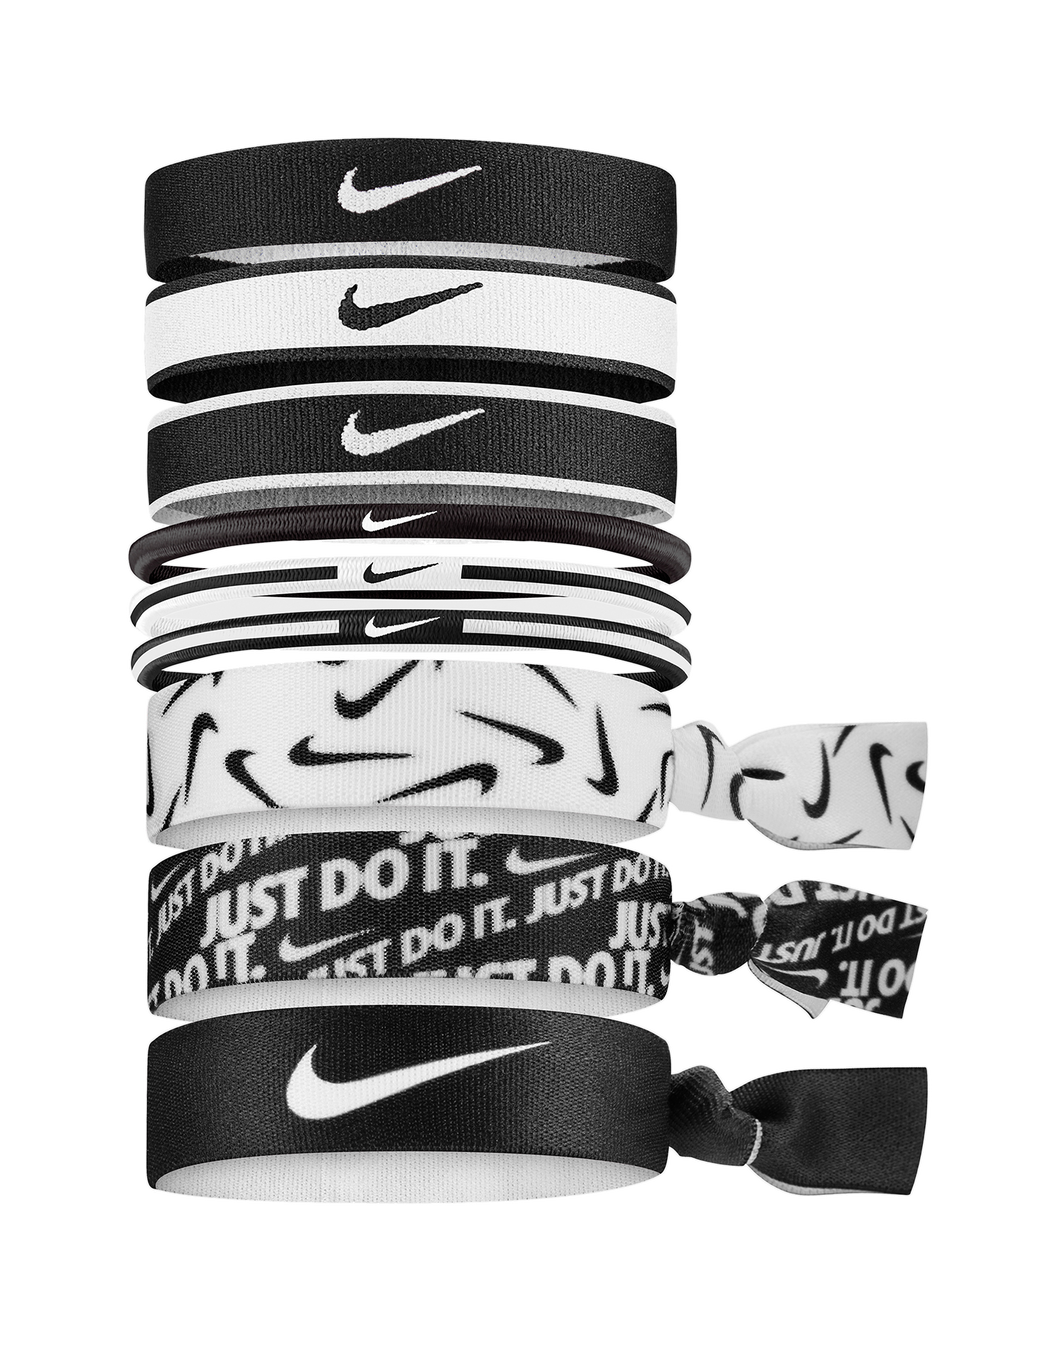 Nike Mixed Ponytail Holder - Assorted 9 Pack